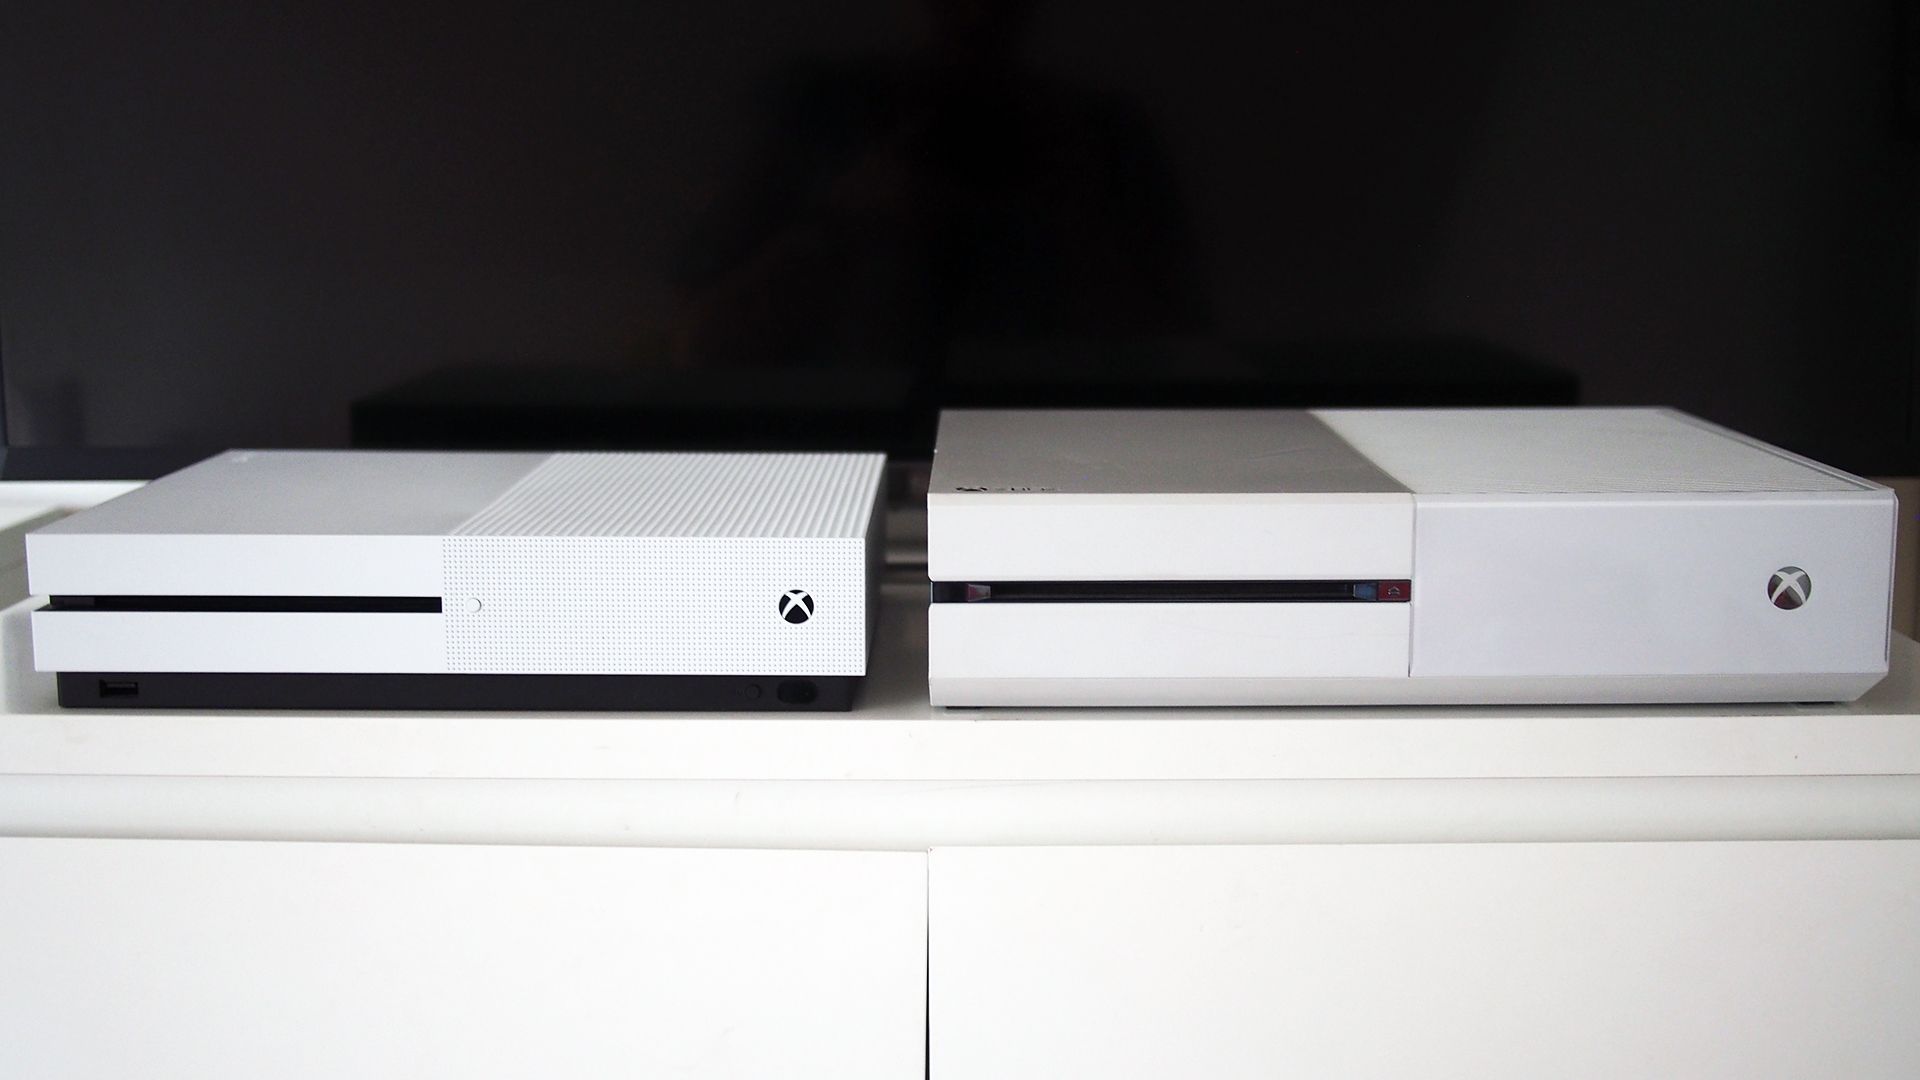 difference between xbox one and xbox one s